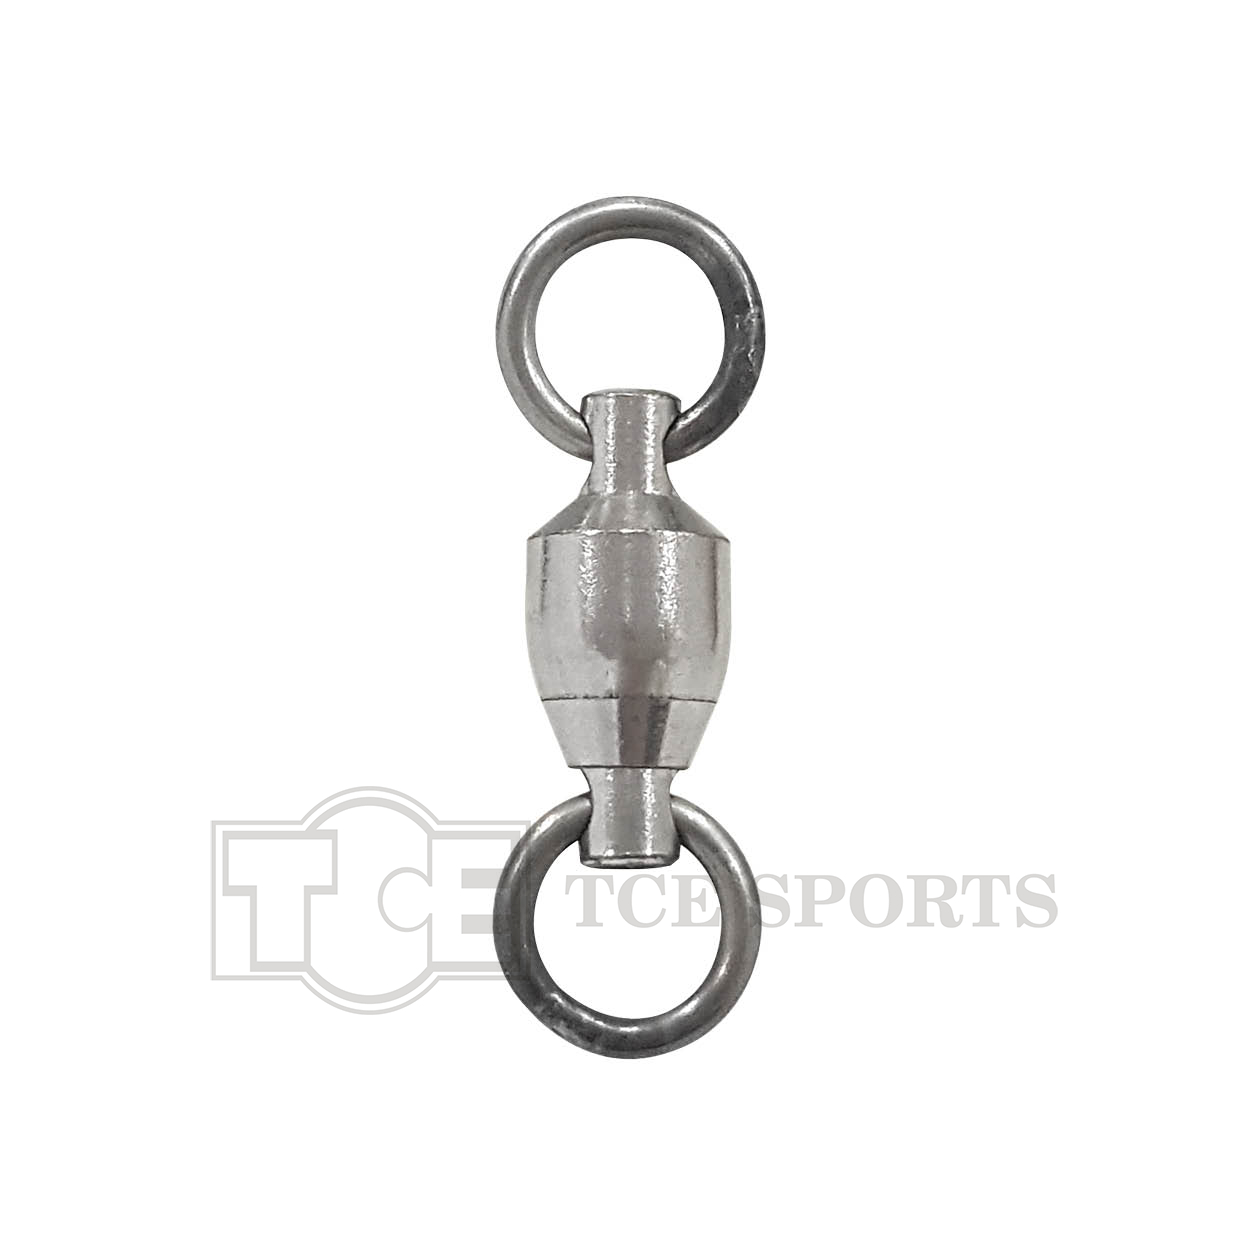 Seahawk - Ball Bearing Swivel With Solid Ring - YM1804W Main